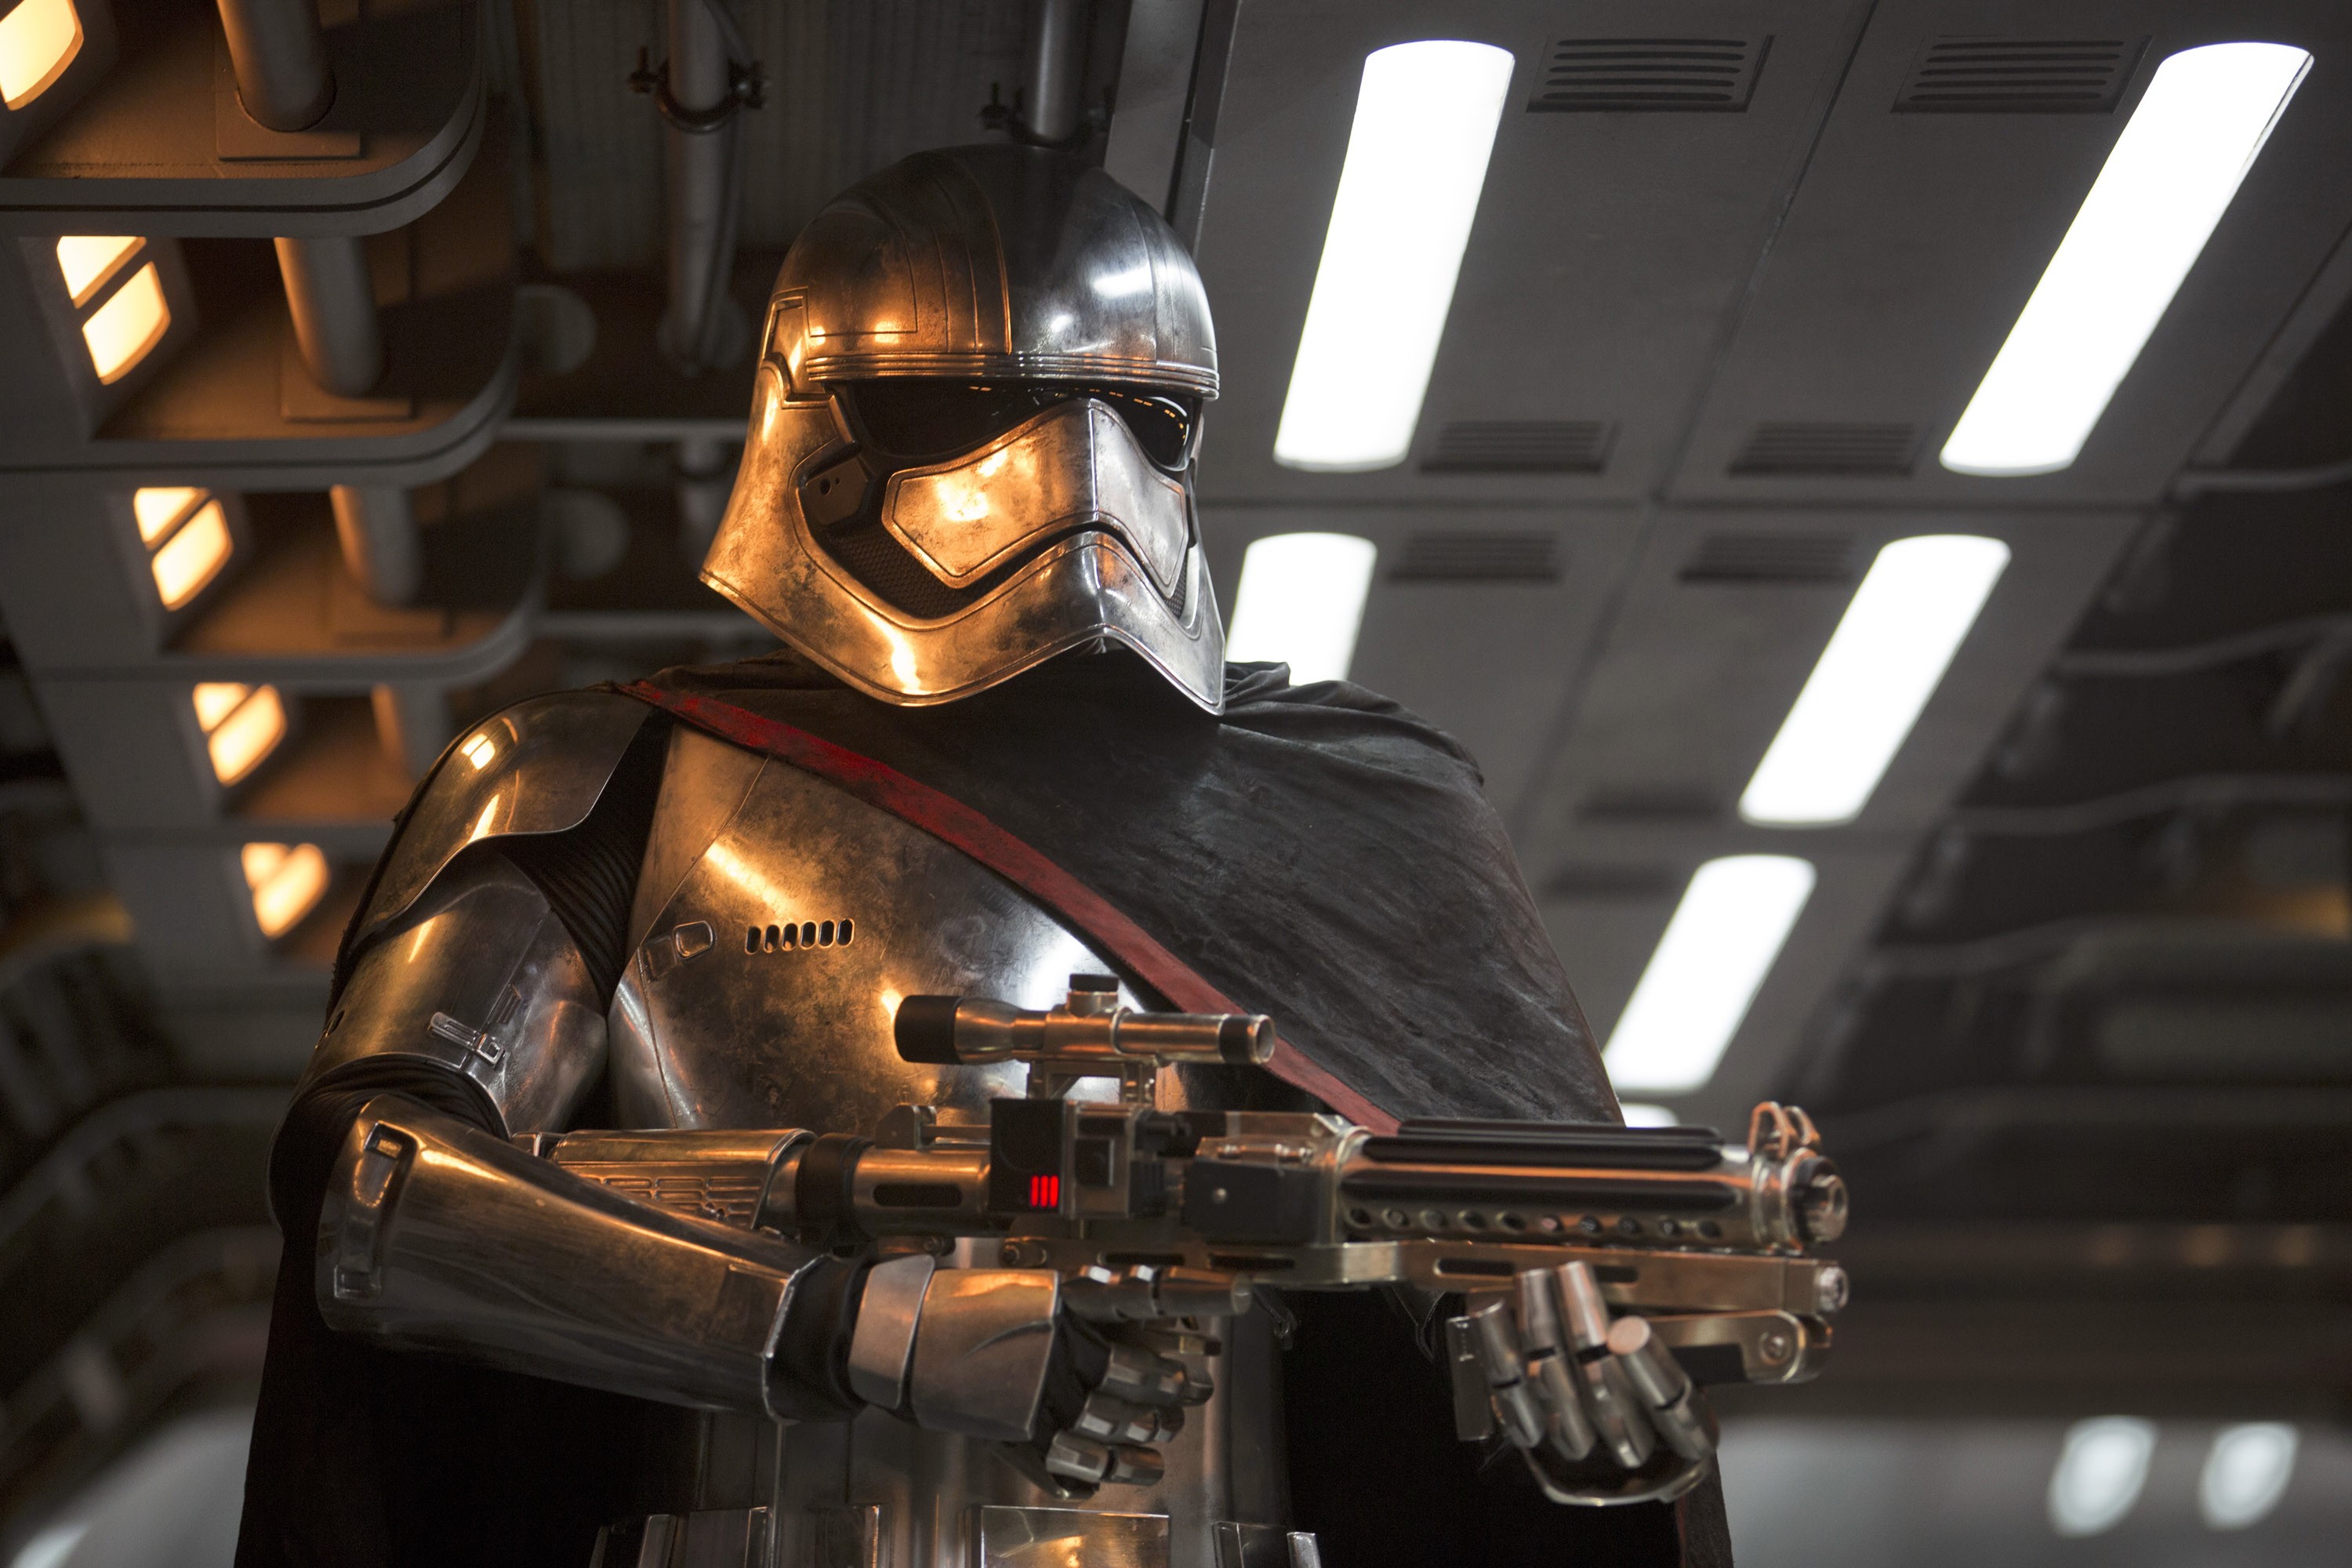 Star Wars Star Wars The Force Awakens Captain Phasma Star Wars Villains The First Order Movies Armor 3000x2000